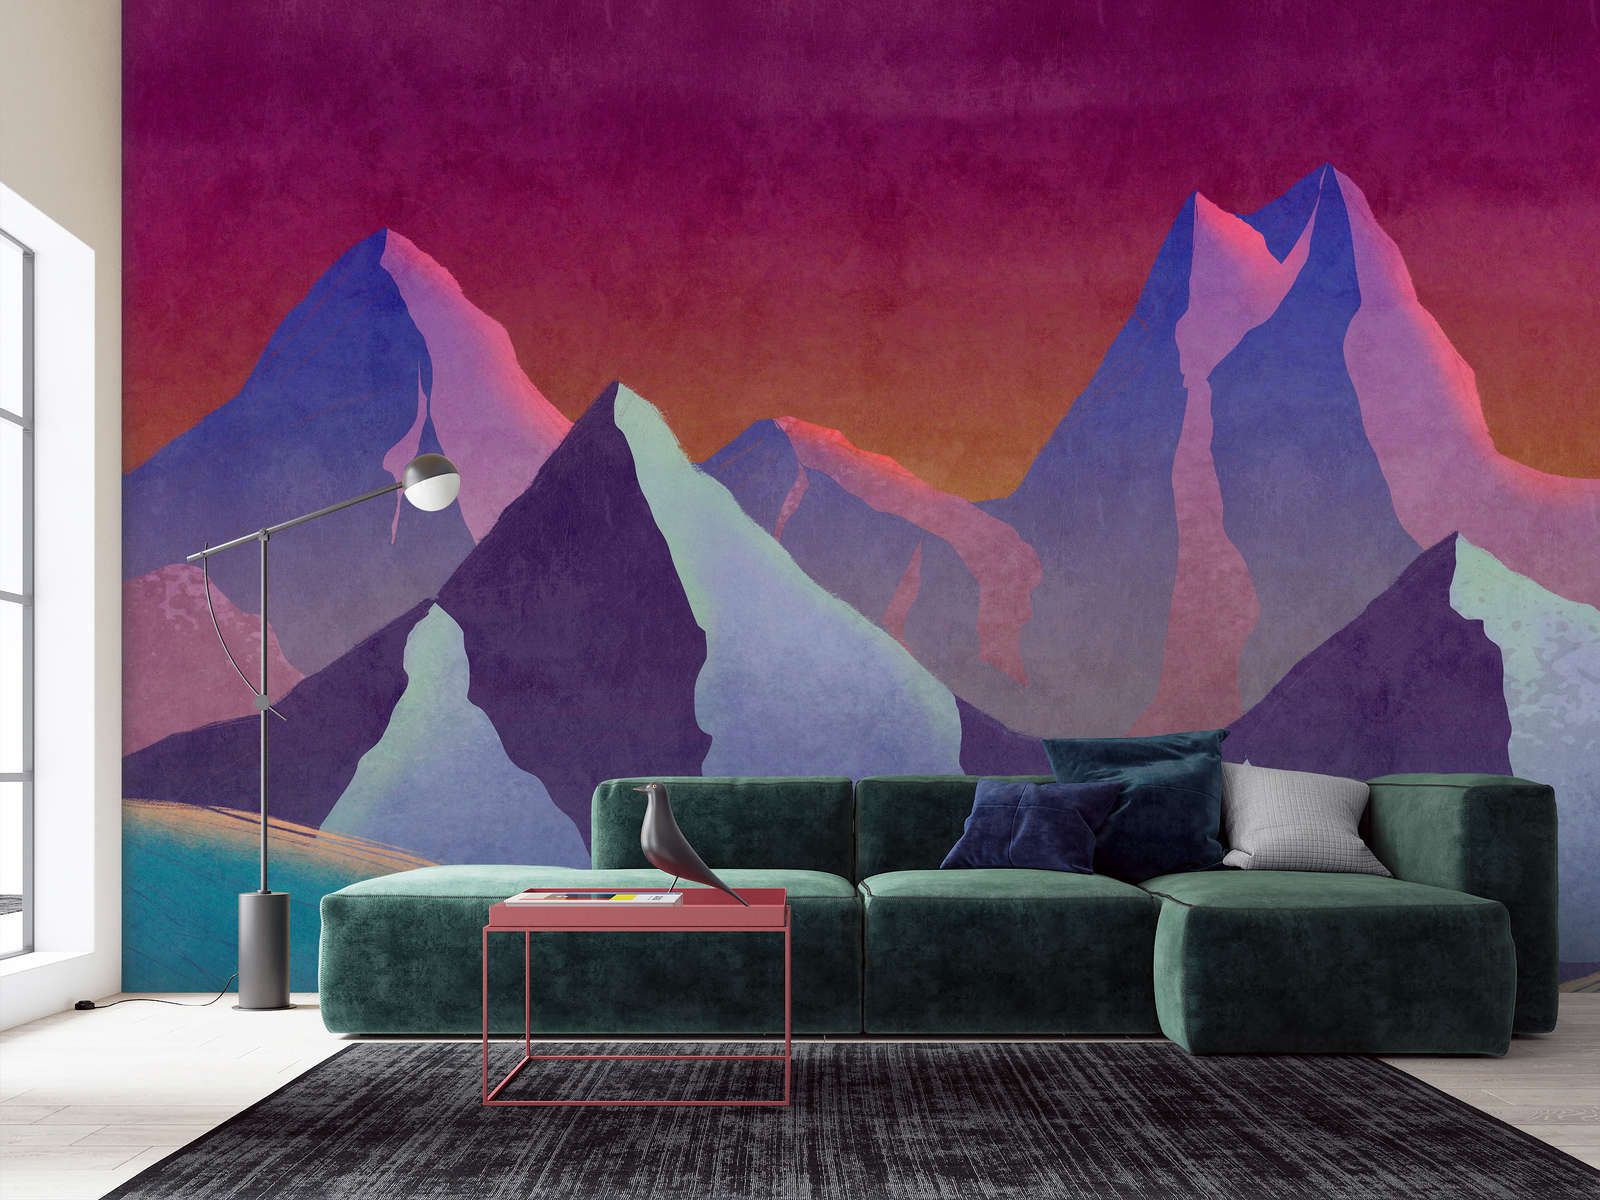             Photo wallpaper »altitude 1« - Abstract mountains in neon colours with vintage plaster texture - Lightly textured non-woven fabric
        